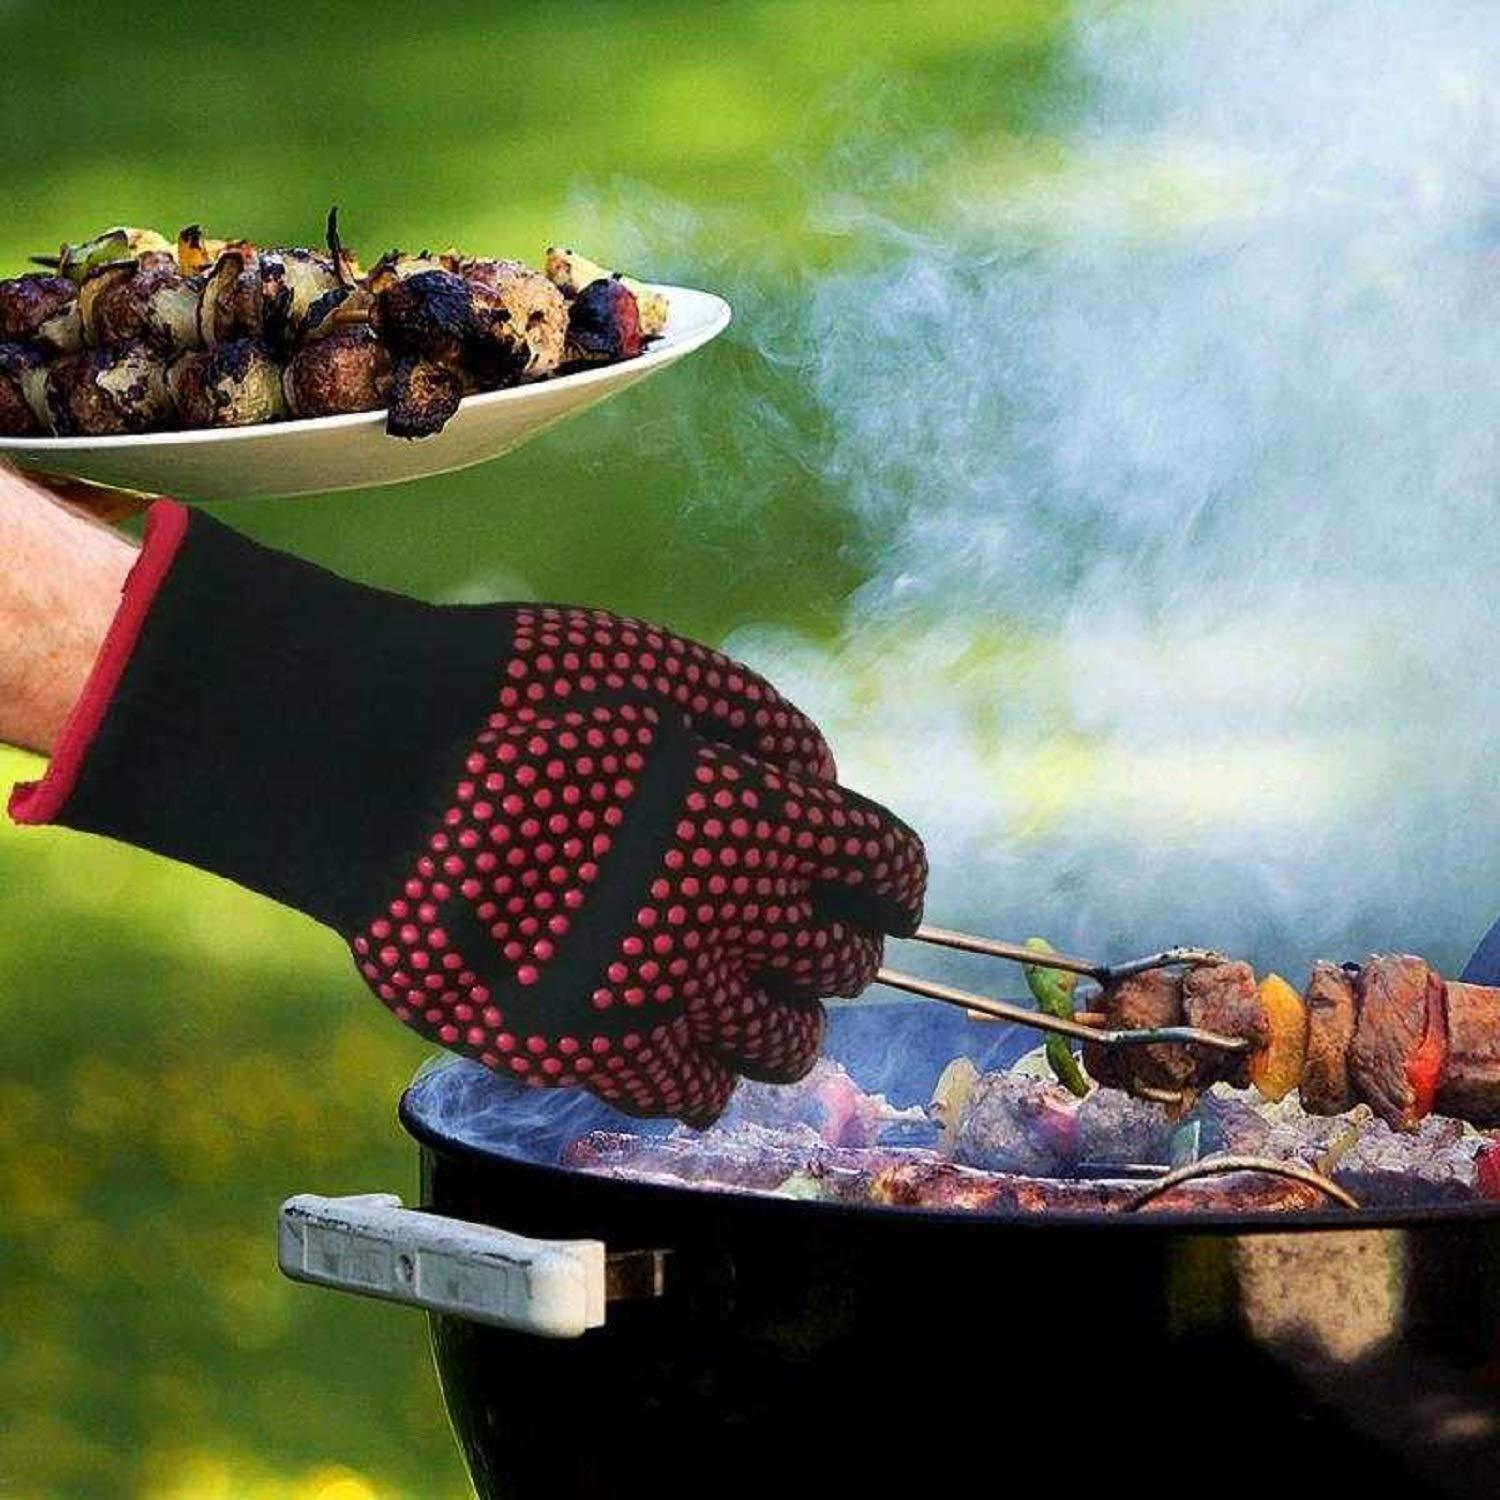 932°F Extreme Heat Resistant BBQ Fireproof Glove